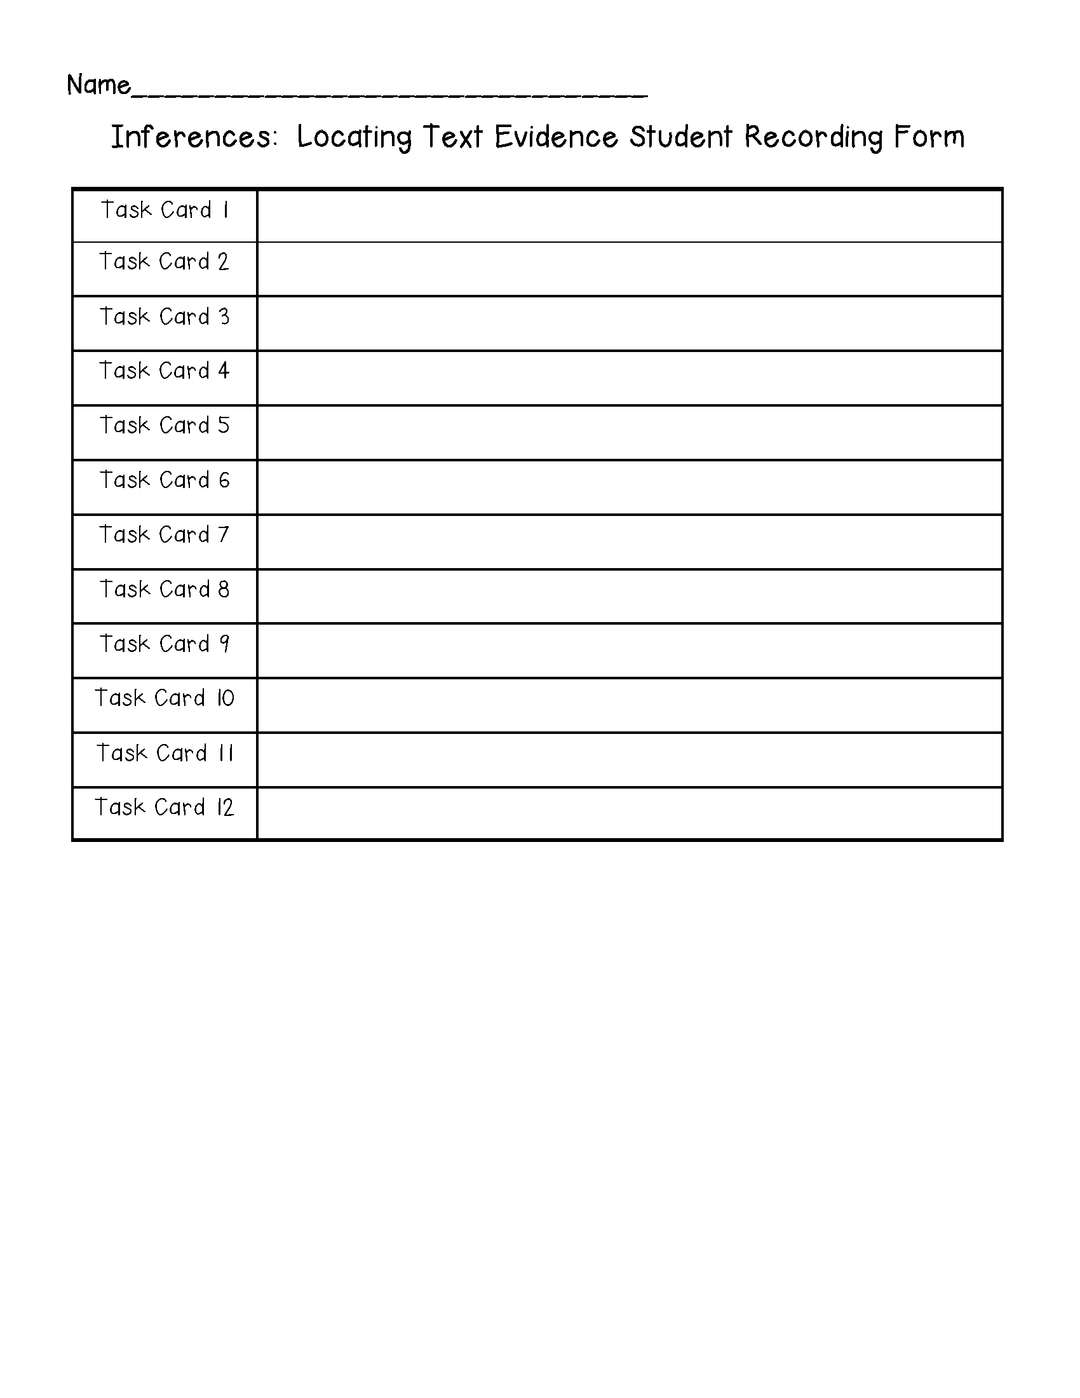 Inference Task Cards: Locating Text Evidence